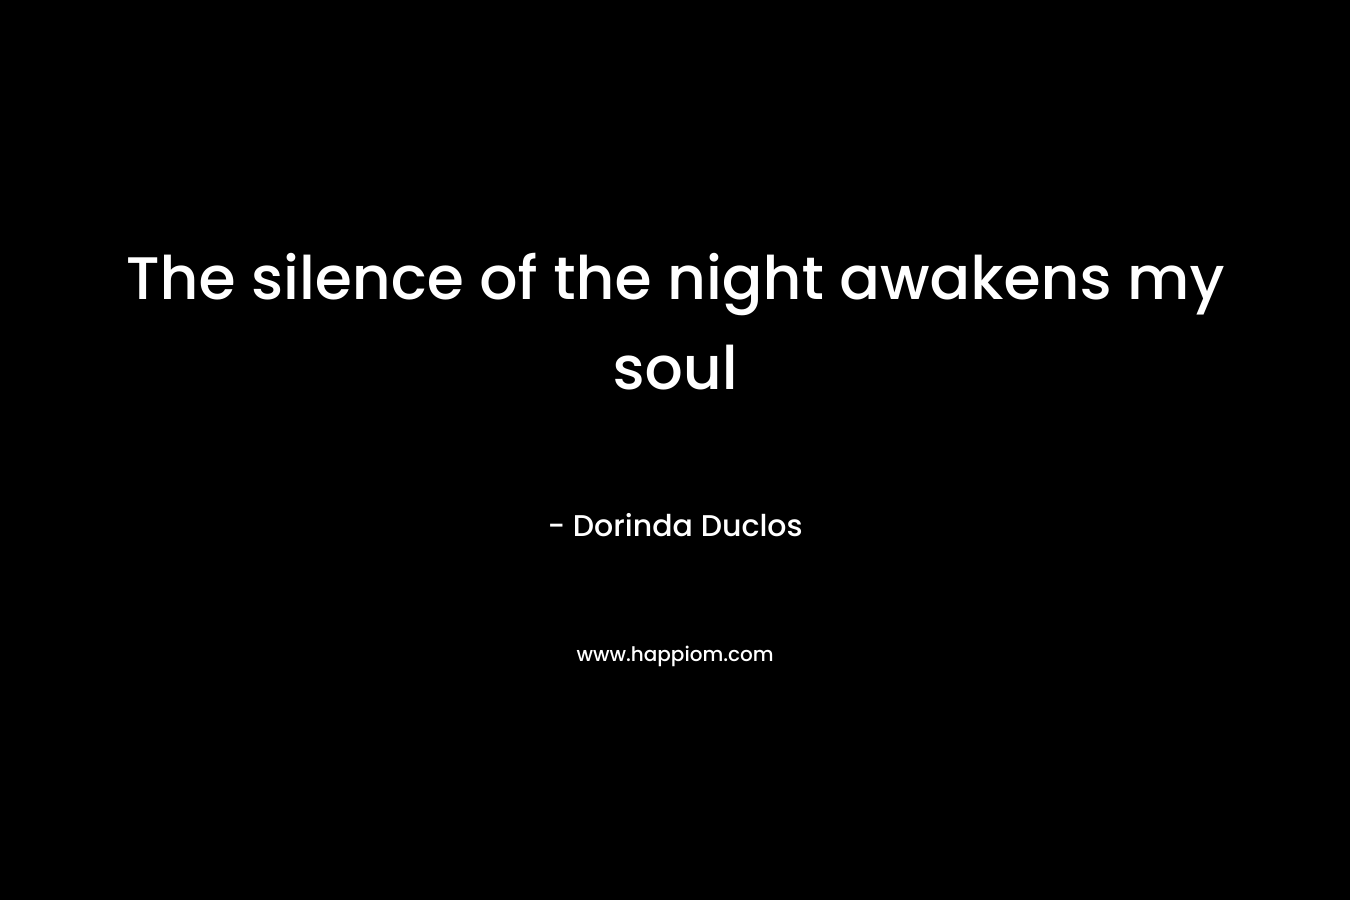 The silence of the night awakens my soul